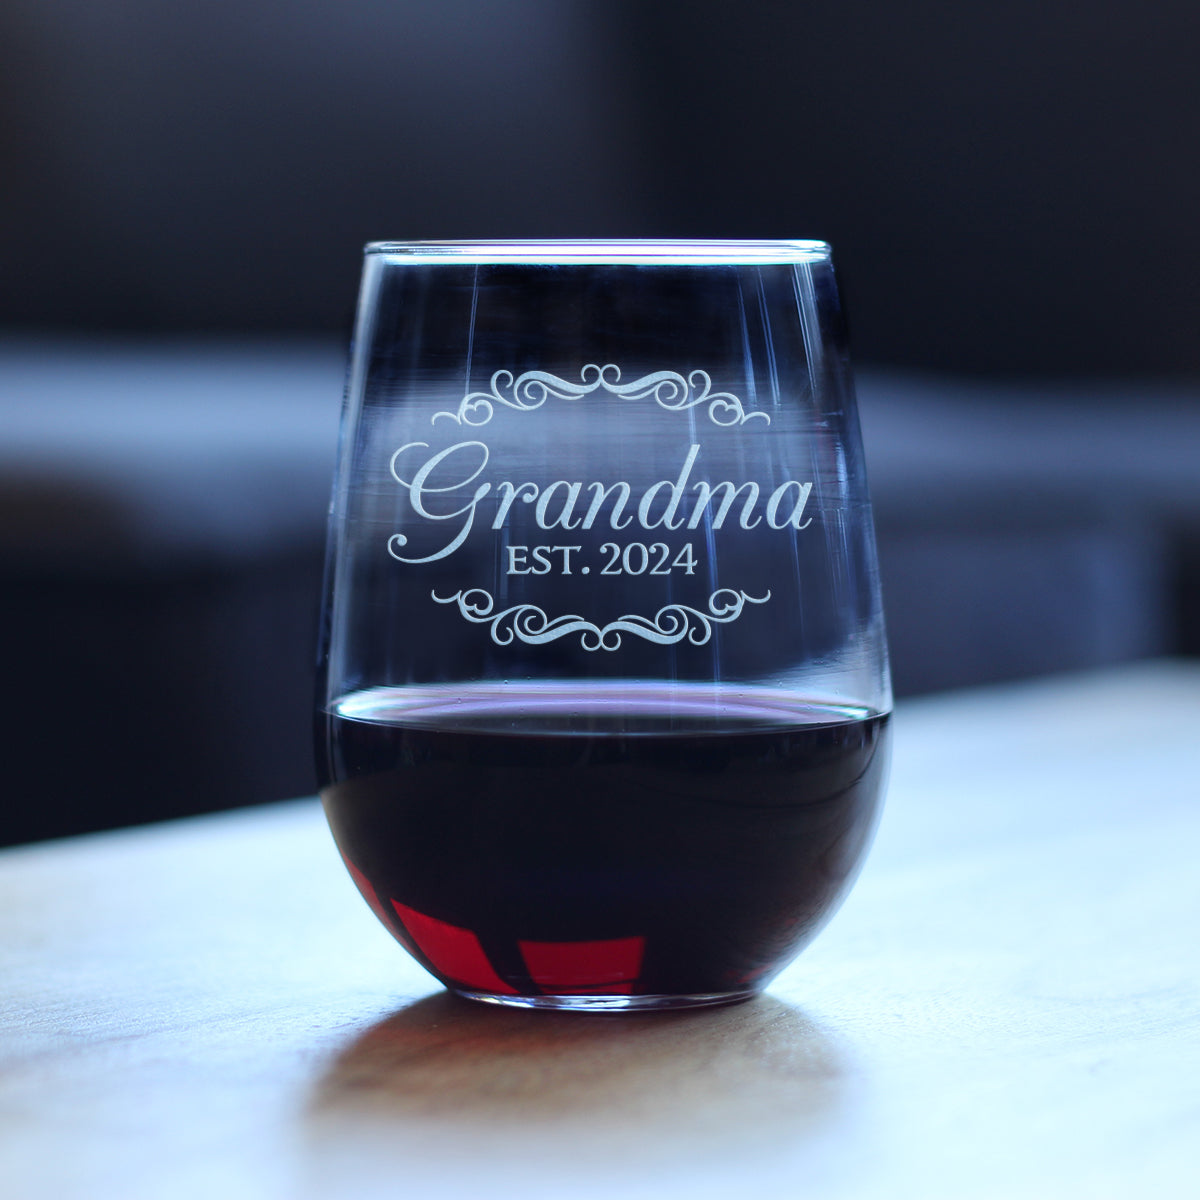 Grandma Est 2024 - New Grandmother Stemless Wine Glass Gift for First Time Grandparents - Decorative 17 Oz Large Glasses